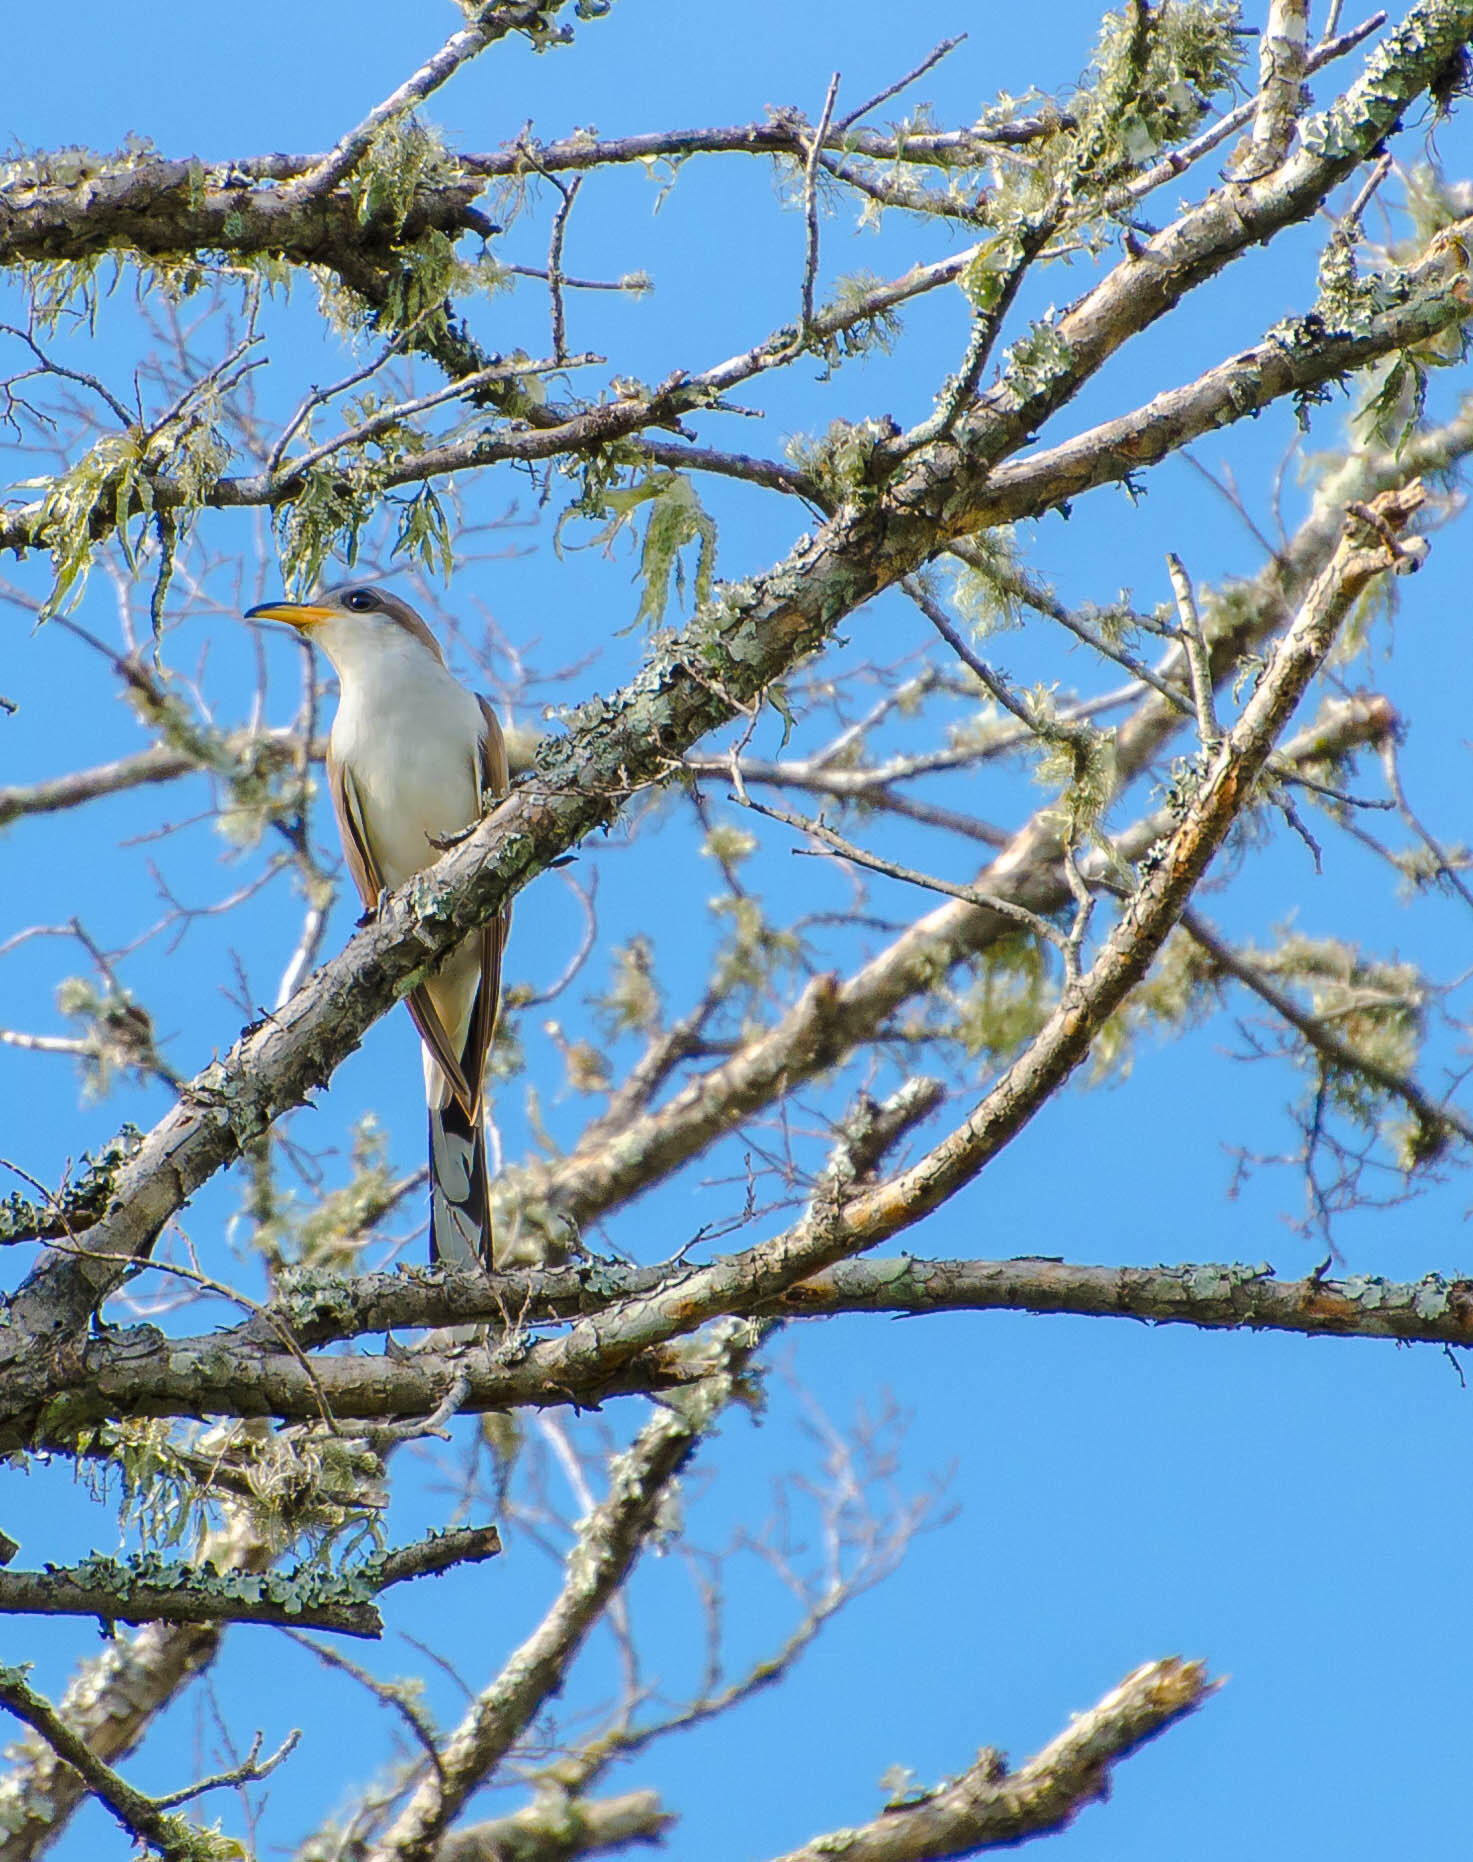 A Western Yellow-billed Cuckoo perches on a diaganol, lichen-covered branch against blue skies.